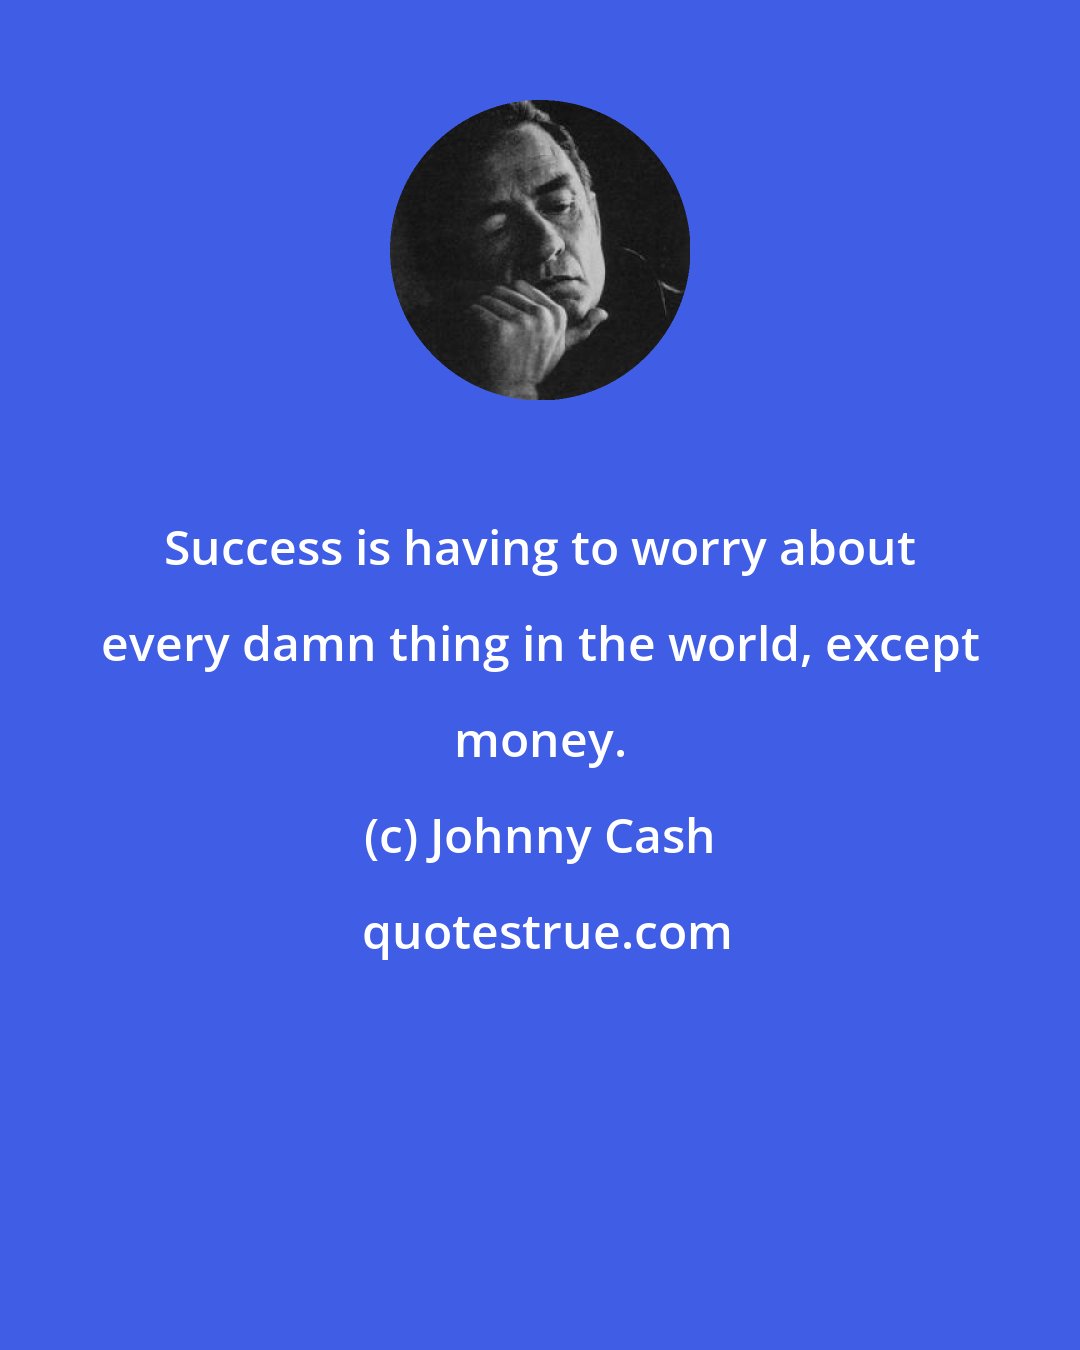 Johnny Cash: Success is having to worry about every damn thing in the world, except money.